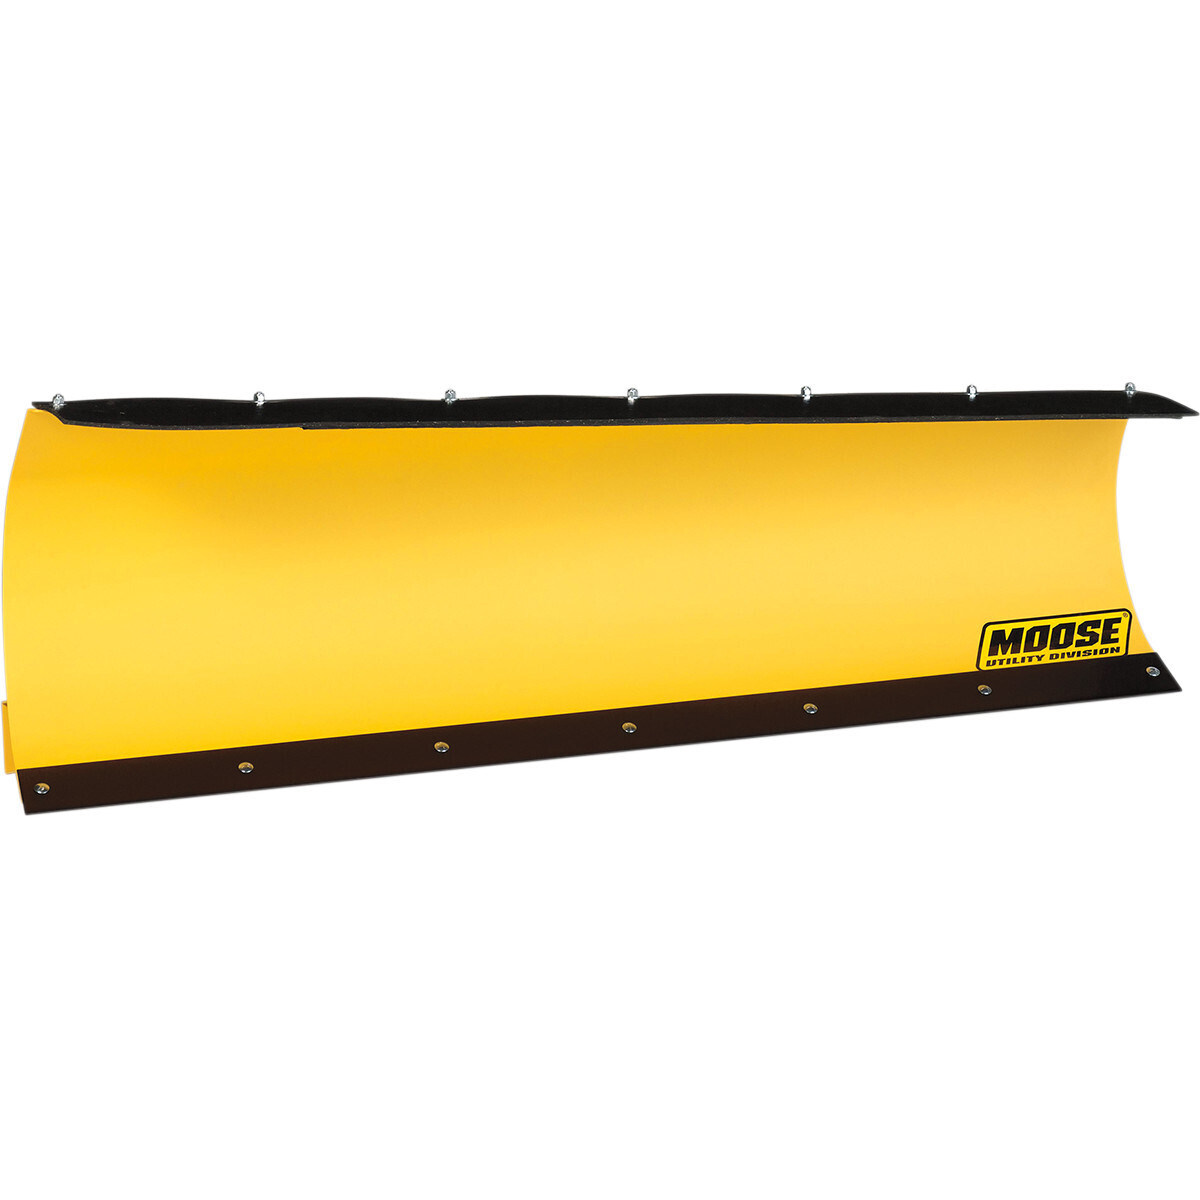 MOOSE UTILITY- SNOW
COUNTY PLOW BLADE 60 MSE 152 cm (60")